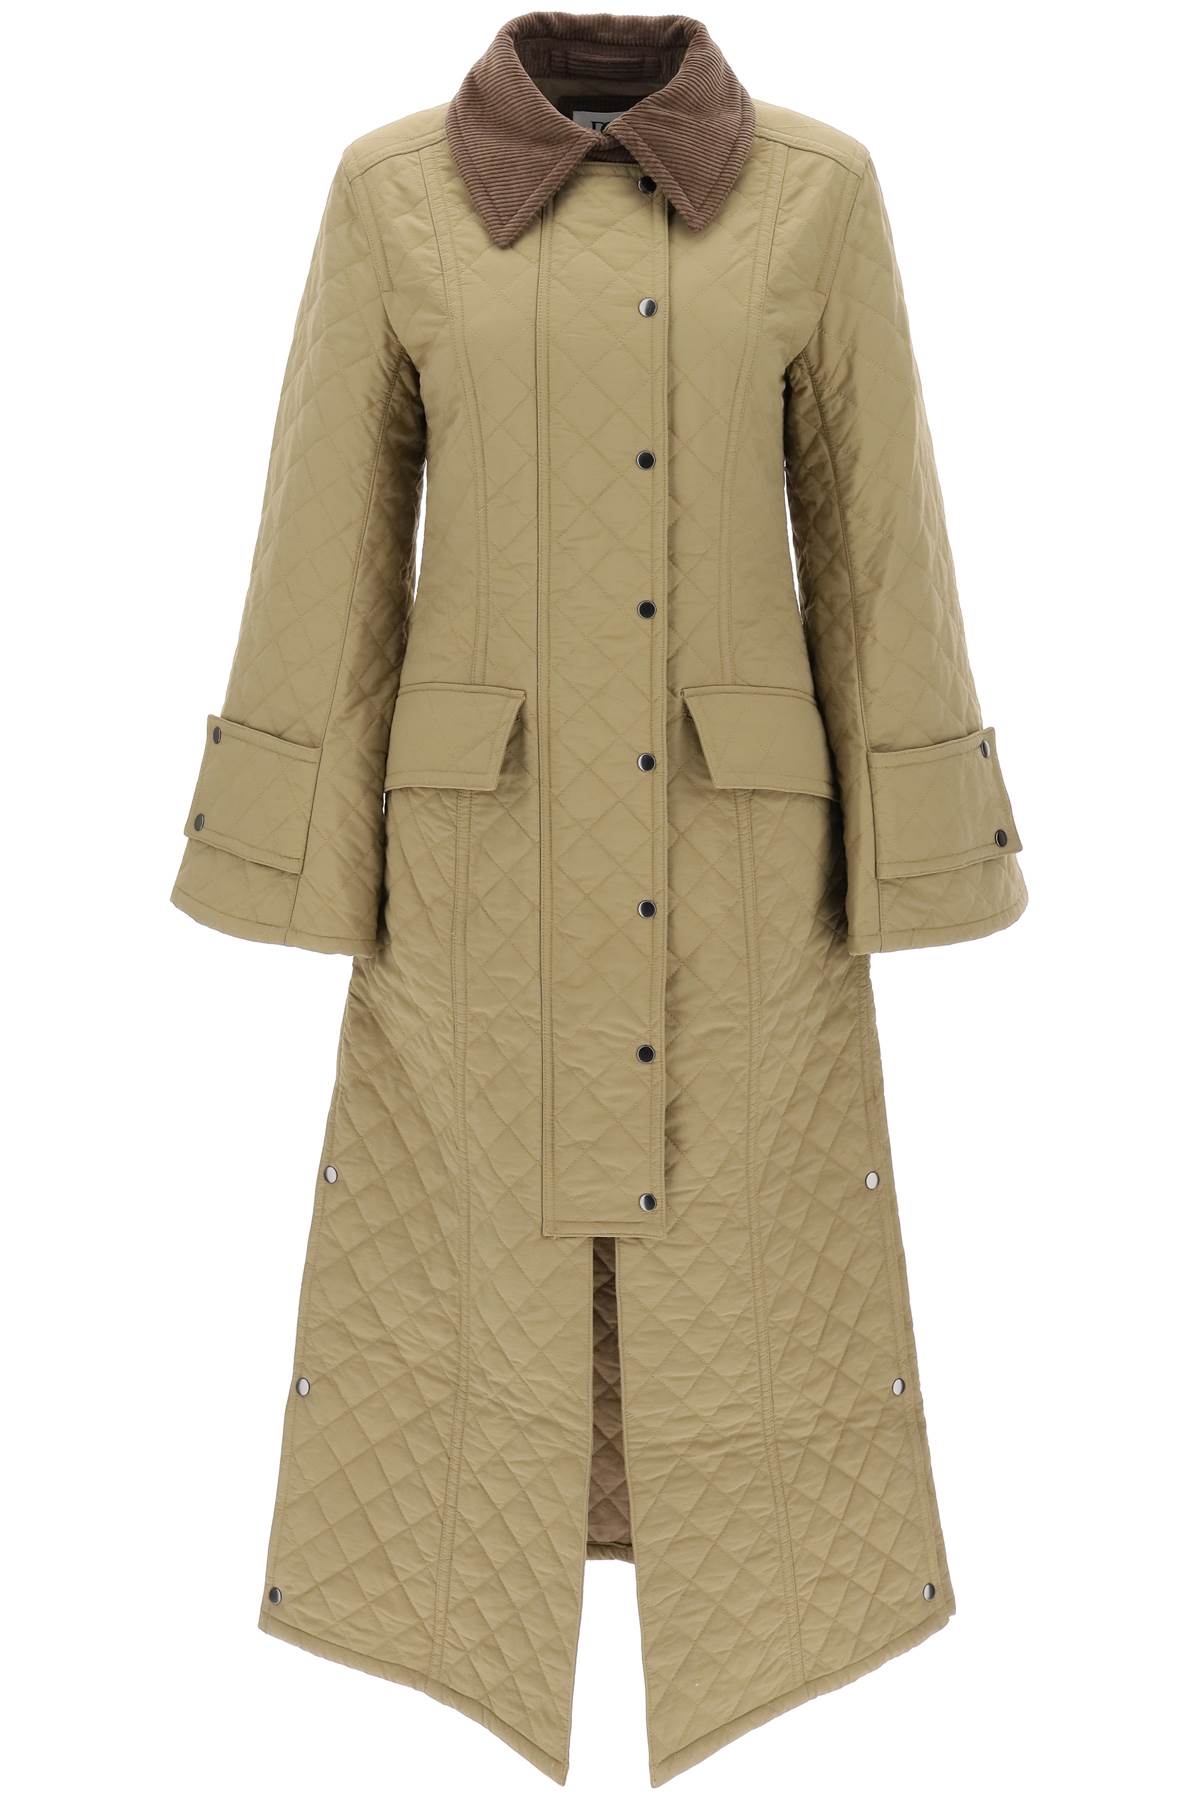 BY MALENE BIRGER PINELOPE QUILTED TRENCH COAT